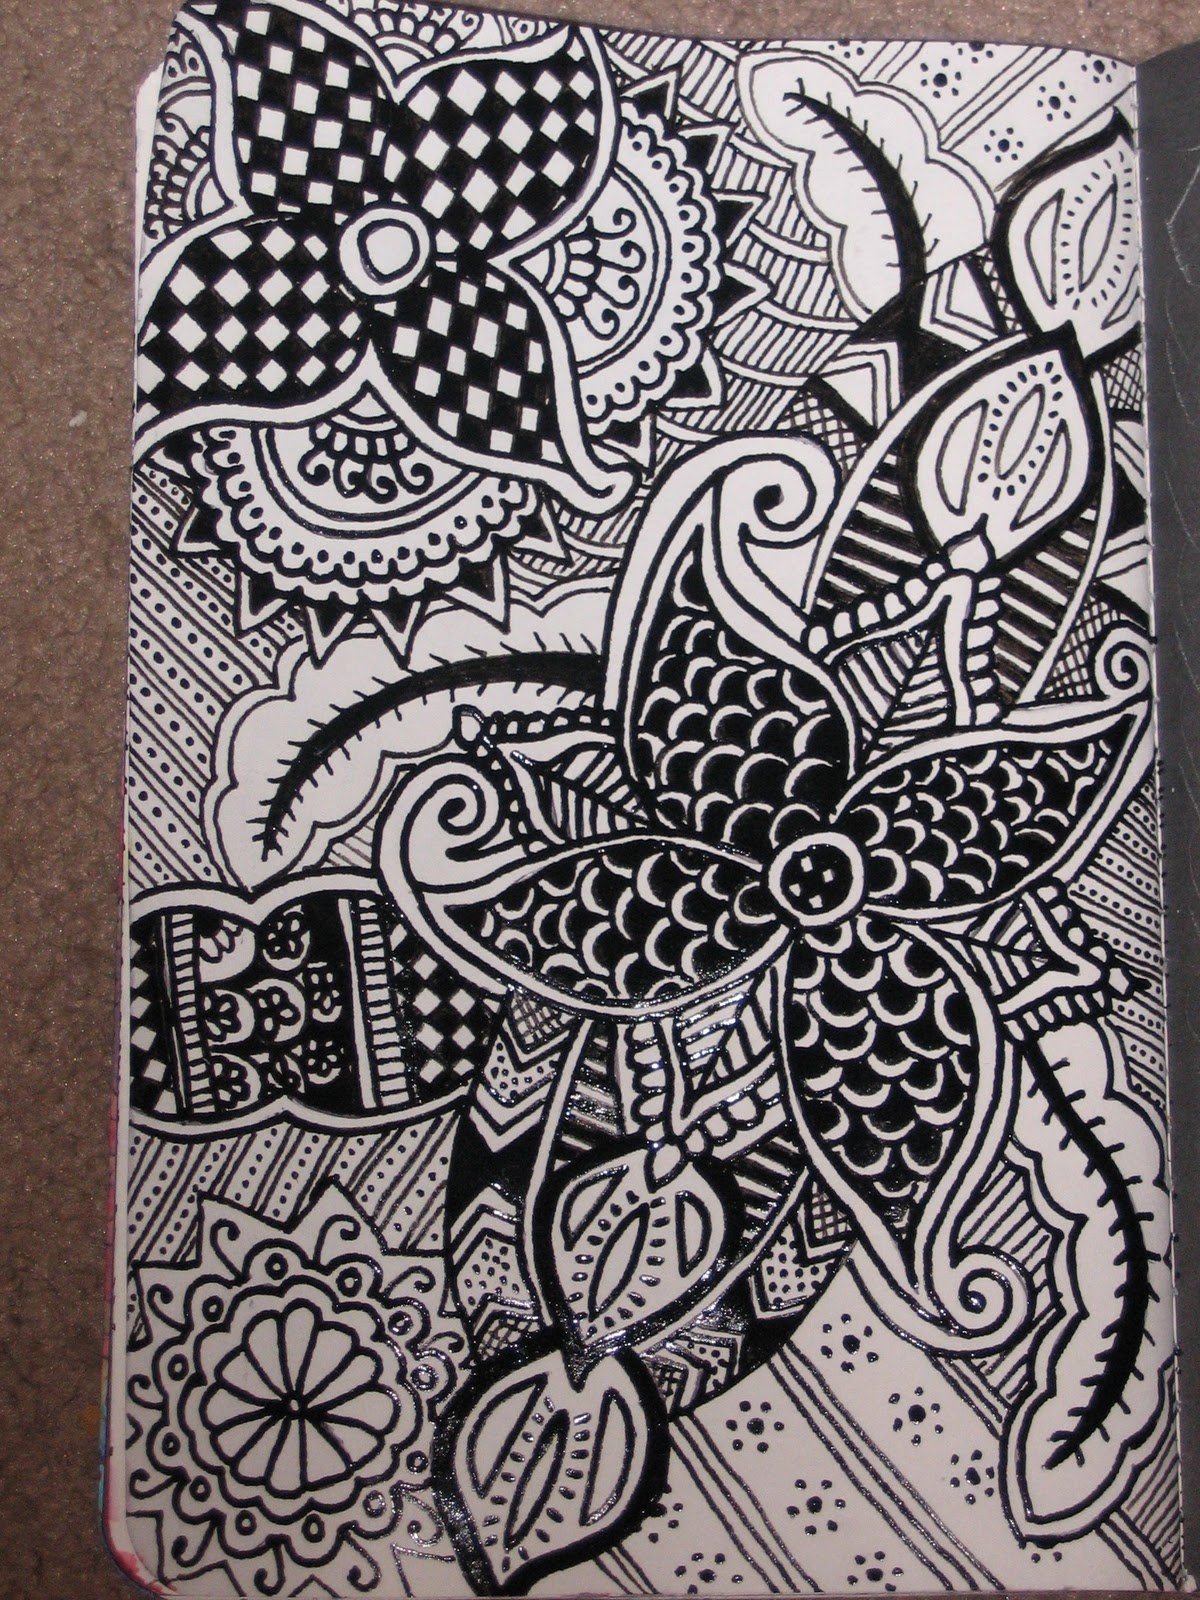 Sharons 365 Day Creative Experiment: Doodle Day 3 & 4